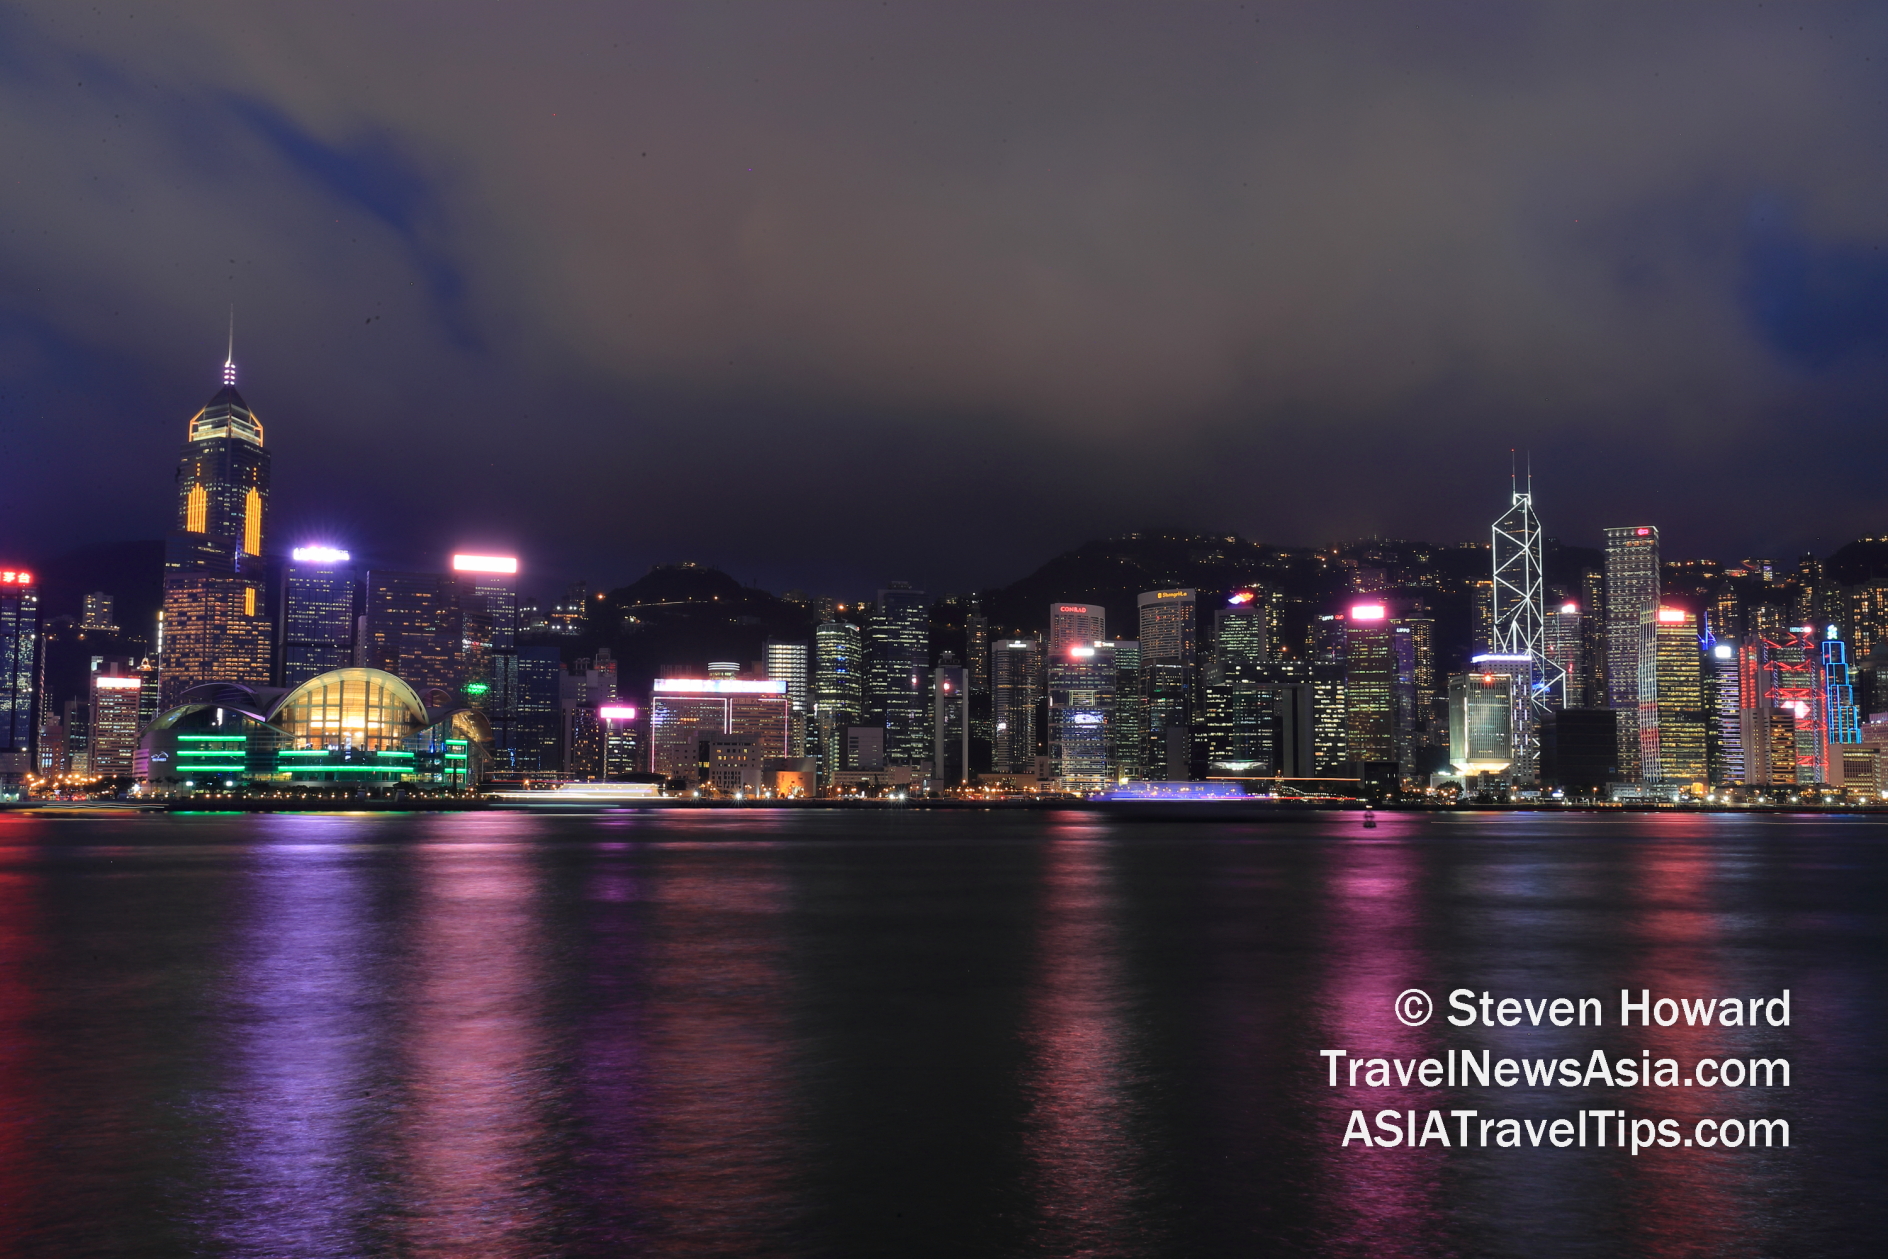 Hong Kong Island. Picture by Steven Howard of TravelNewsAsia.com Click to enlarge.